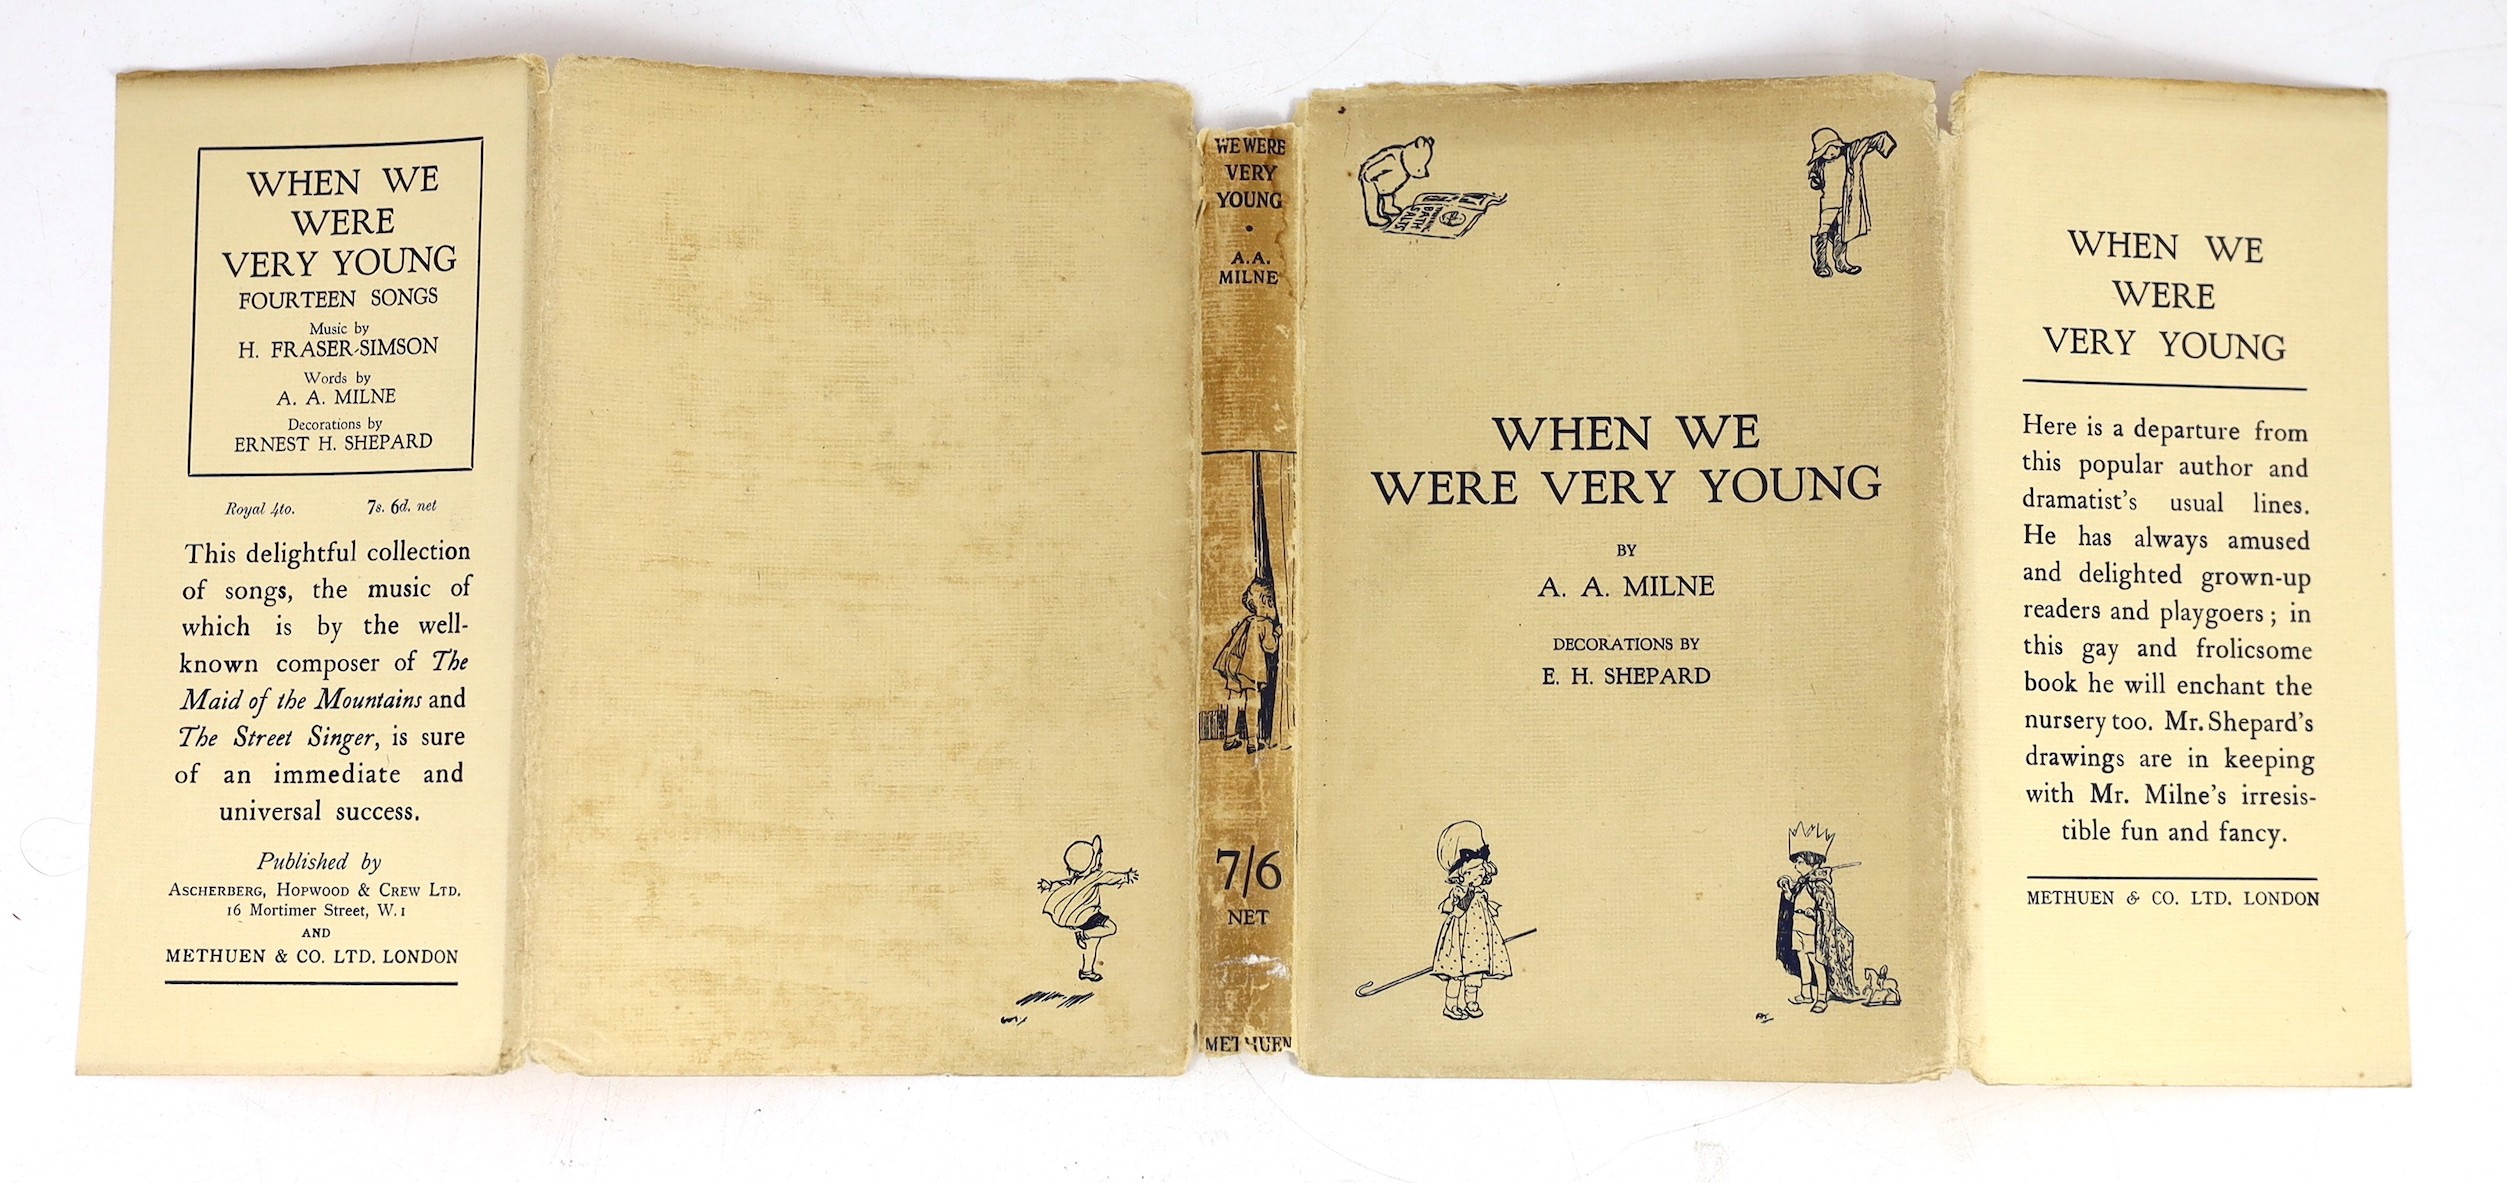 Milne, A.A - When We Were Very Young, 1st edition, 1st printing, second state with ix to foot of contents page, illustrated by Ernest Shepard, original blue pictorial cloth gilt stamped, with d/j, ownership inscription (